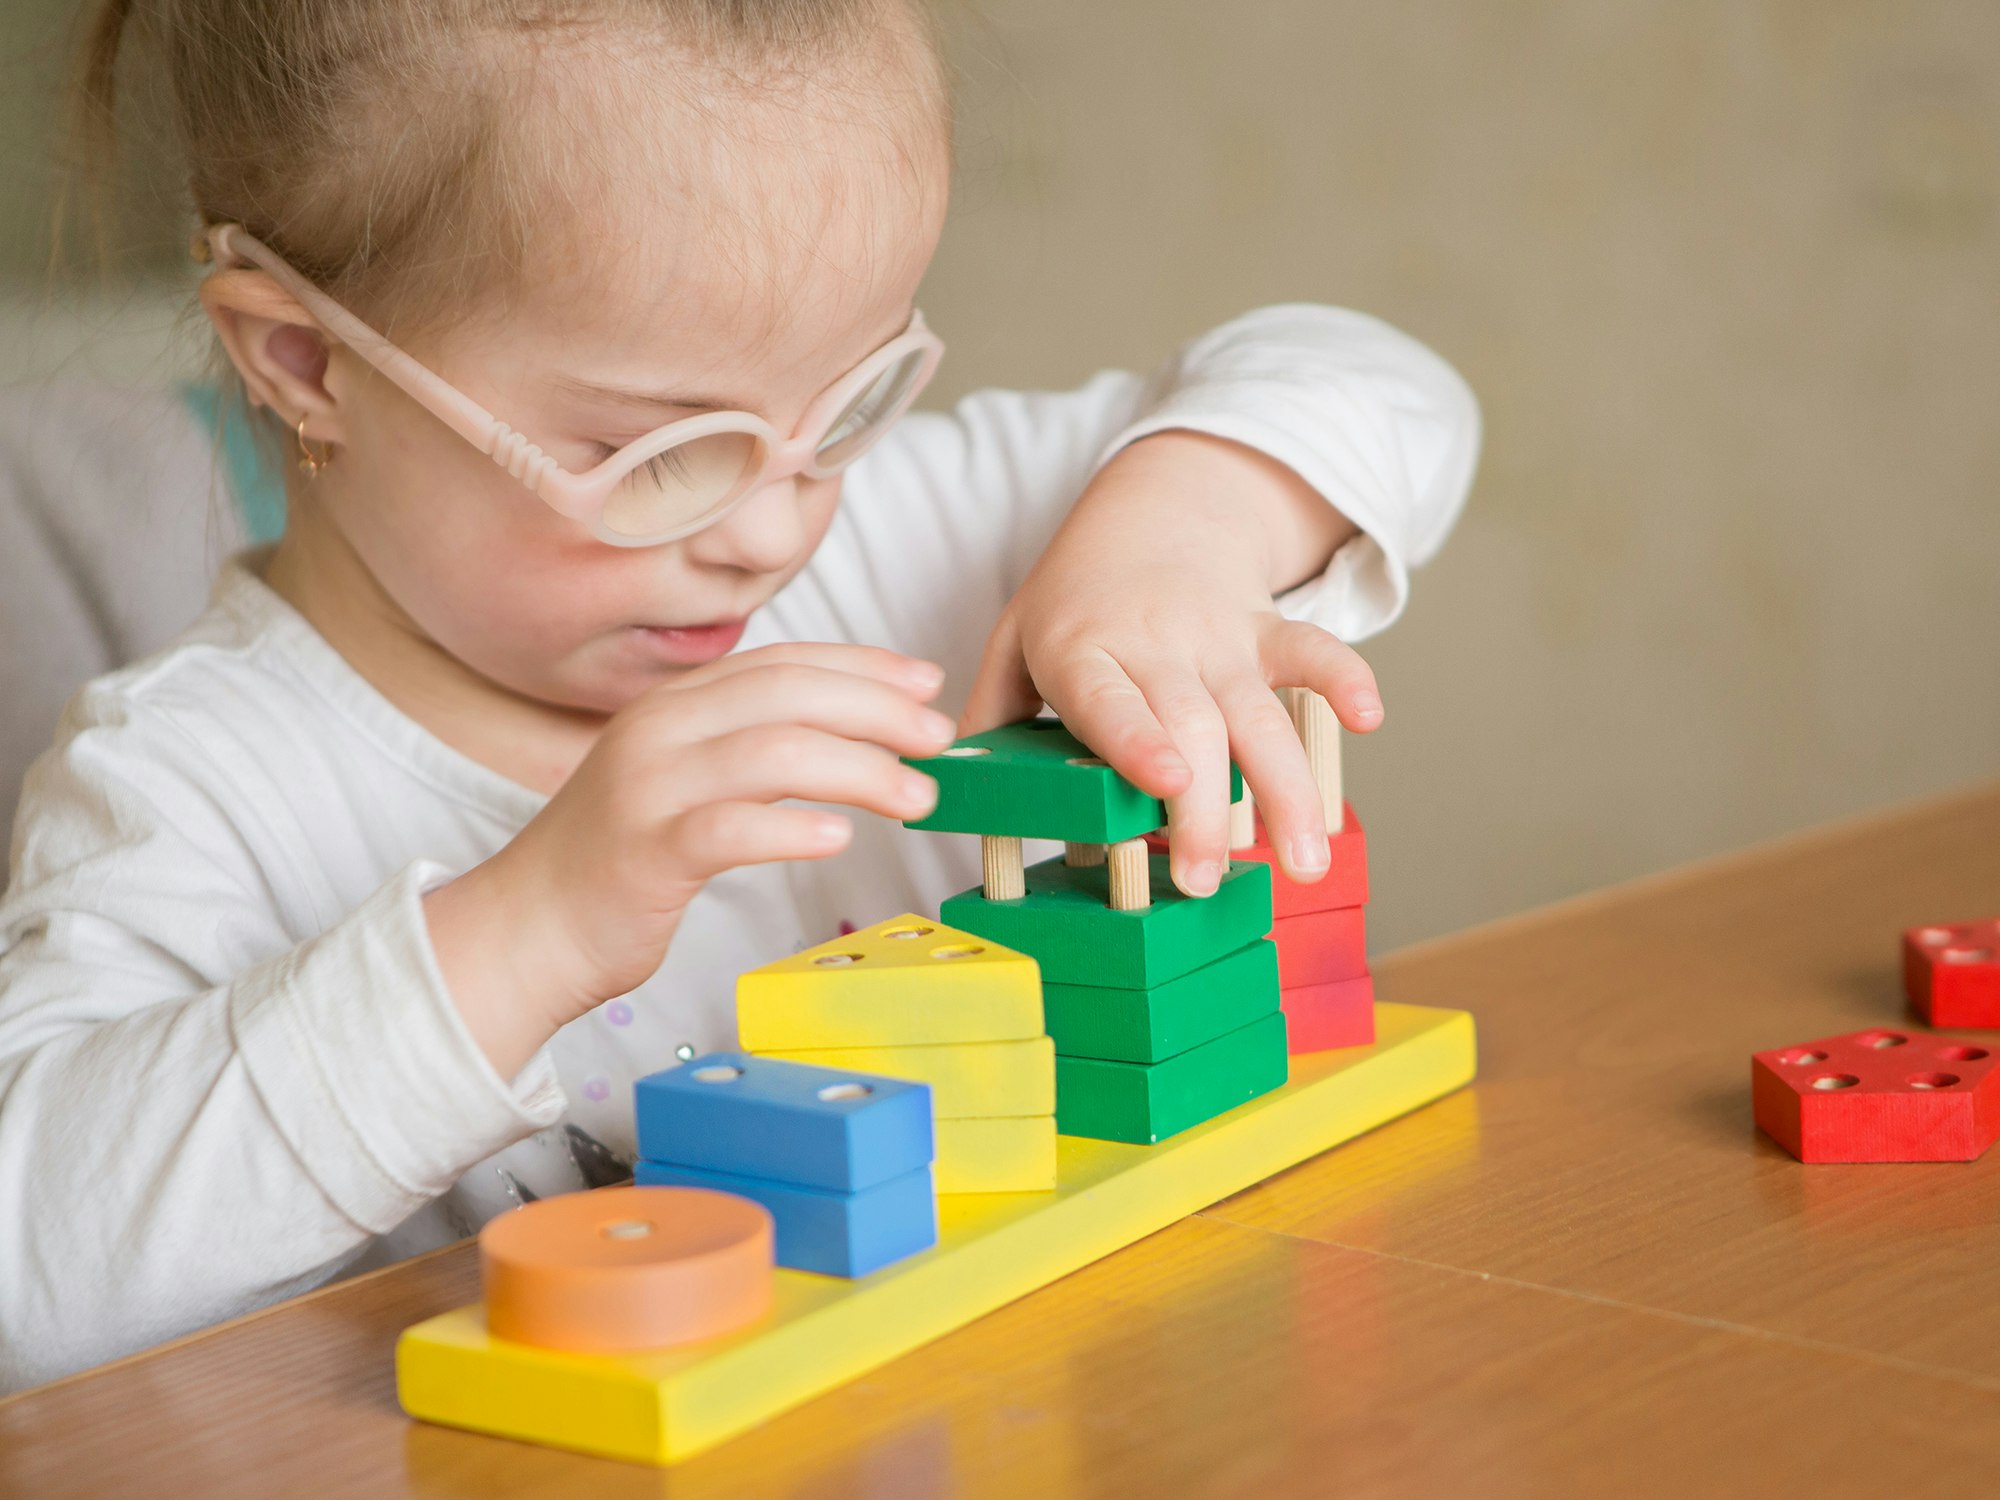 $47 million dedicated in Early Childhood and Early Intervention (ECEI) has been announced for SA (Source: Shutterstock)
